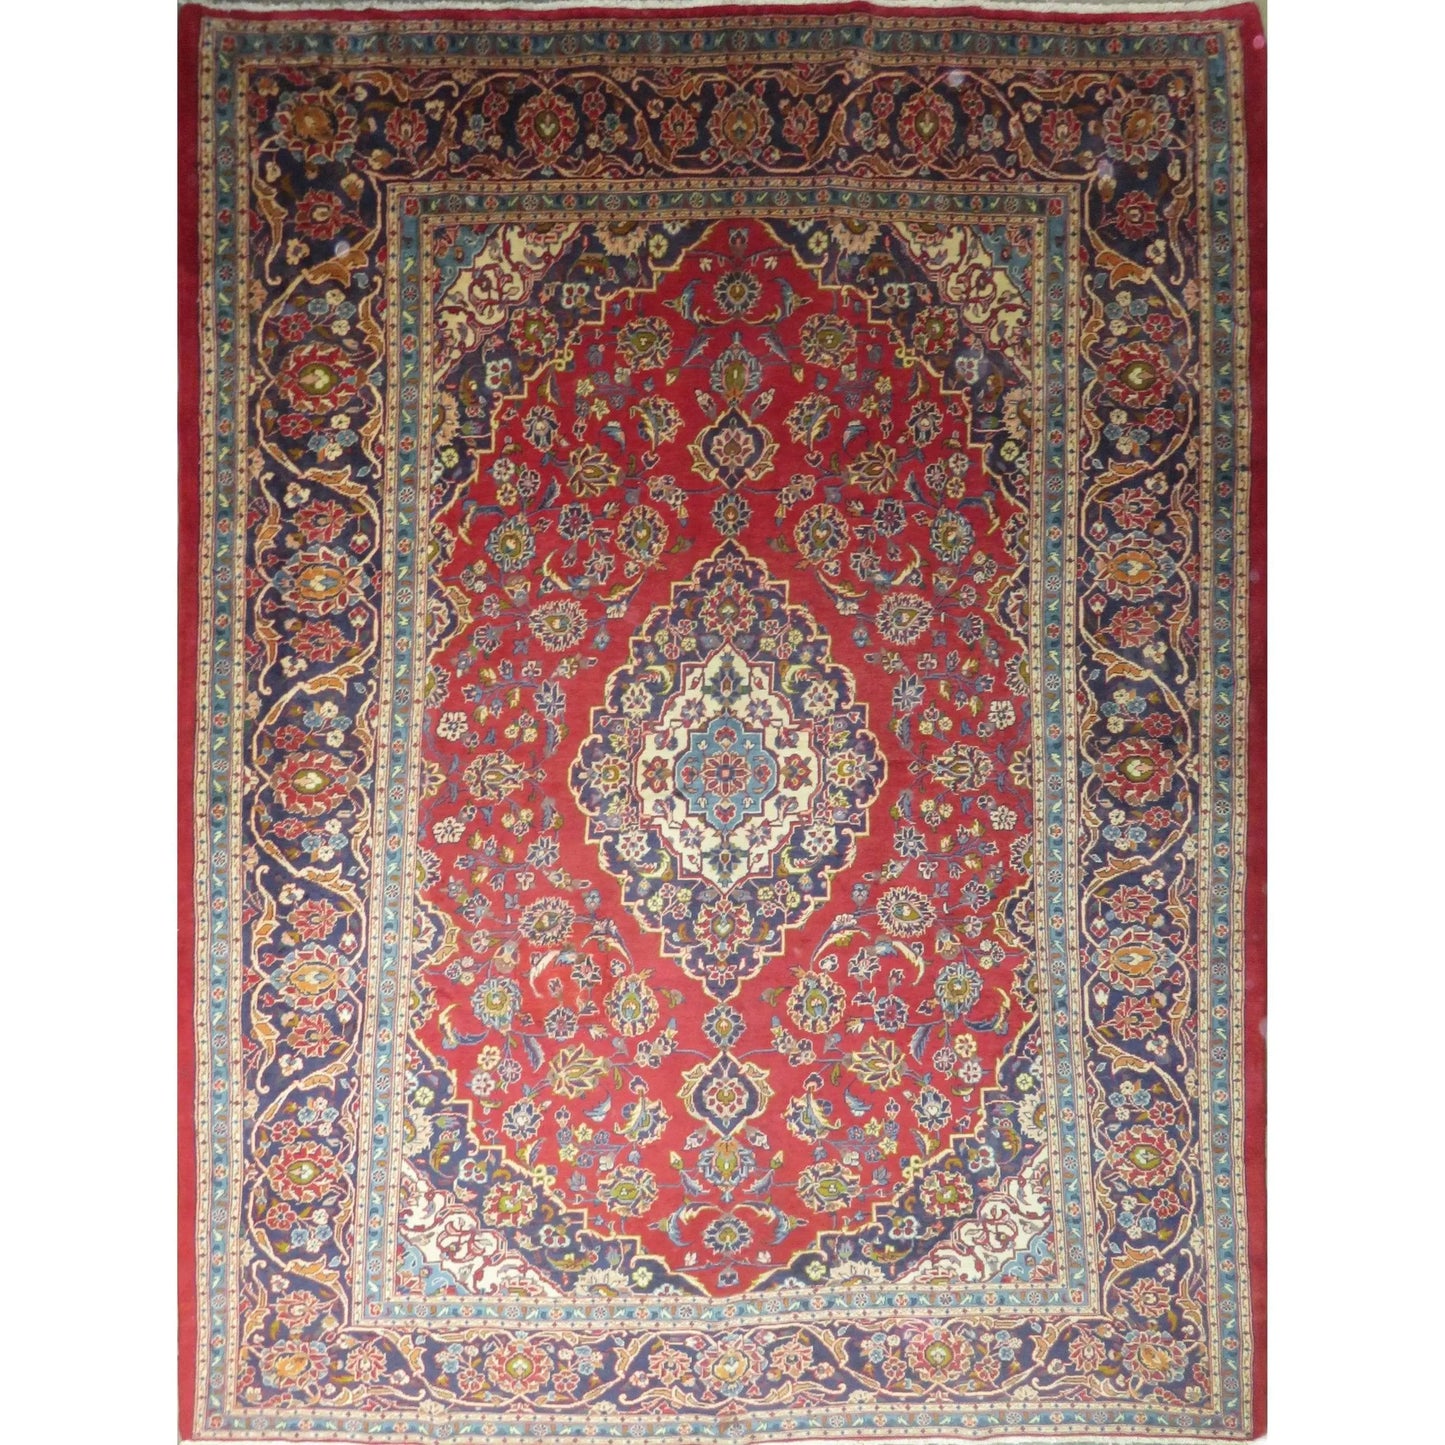 Hand-Knotted Persian Wool Rug _ Luxurious Vintage Design, 12'6" X 9'2", Artisan Crafted